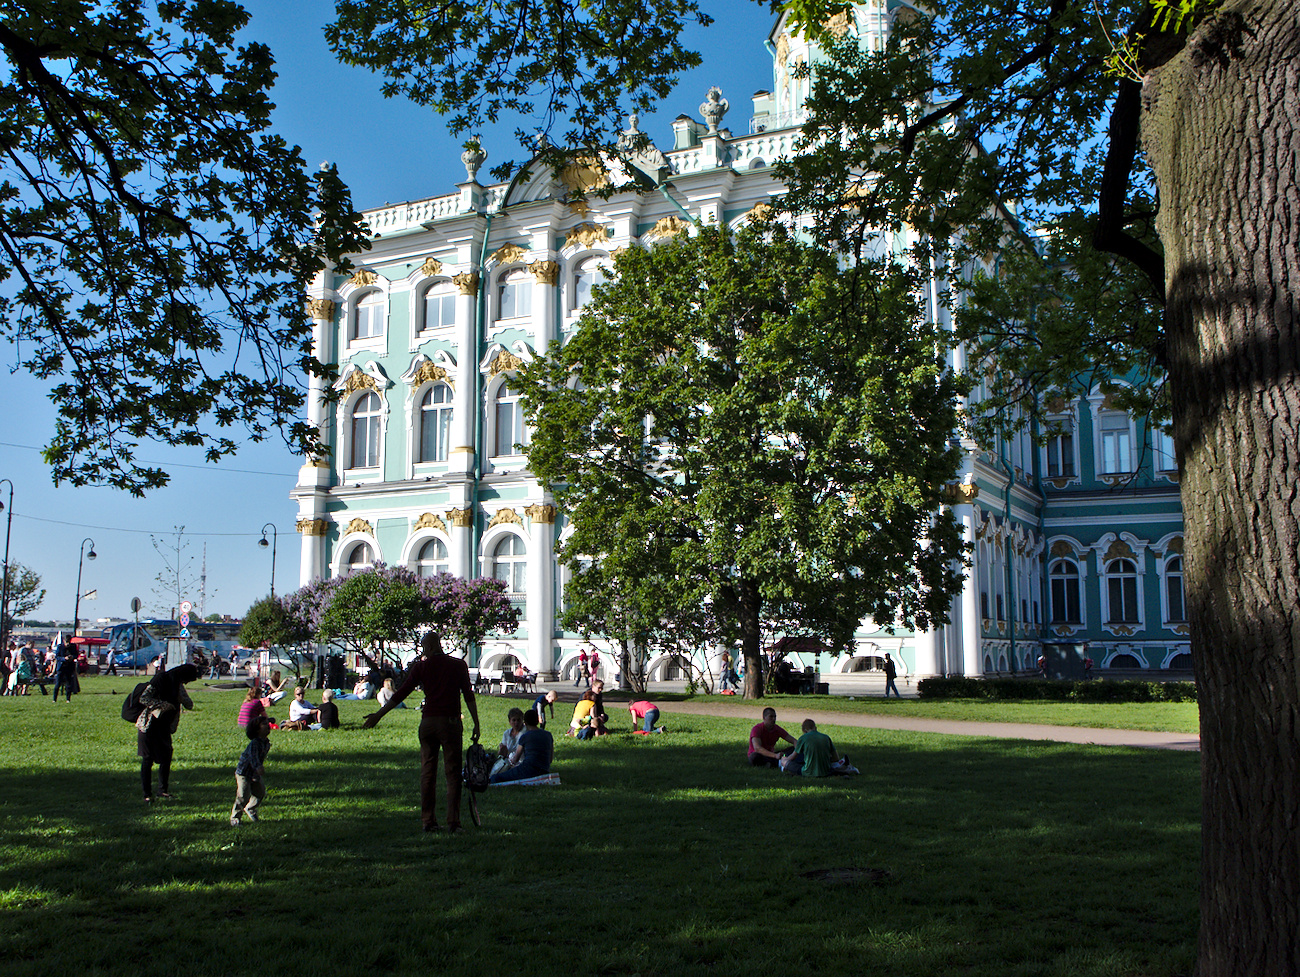 People enjoying the weather next to the Eremitage museum, St. Petersburg, Russia.